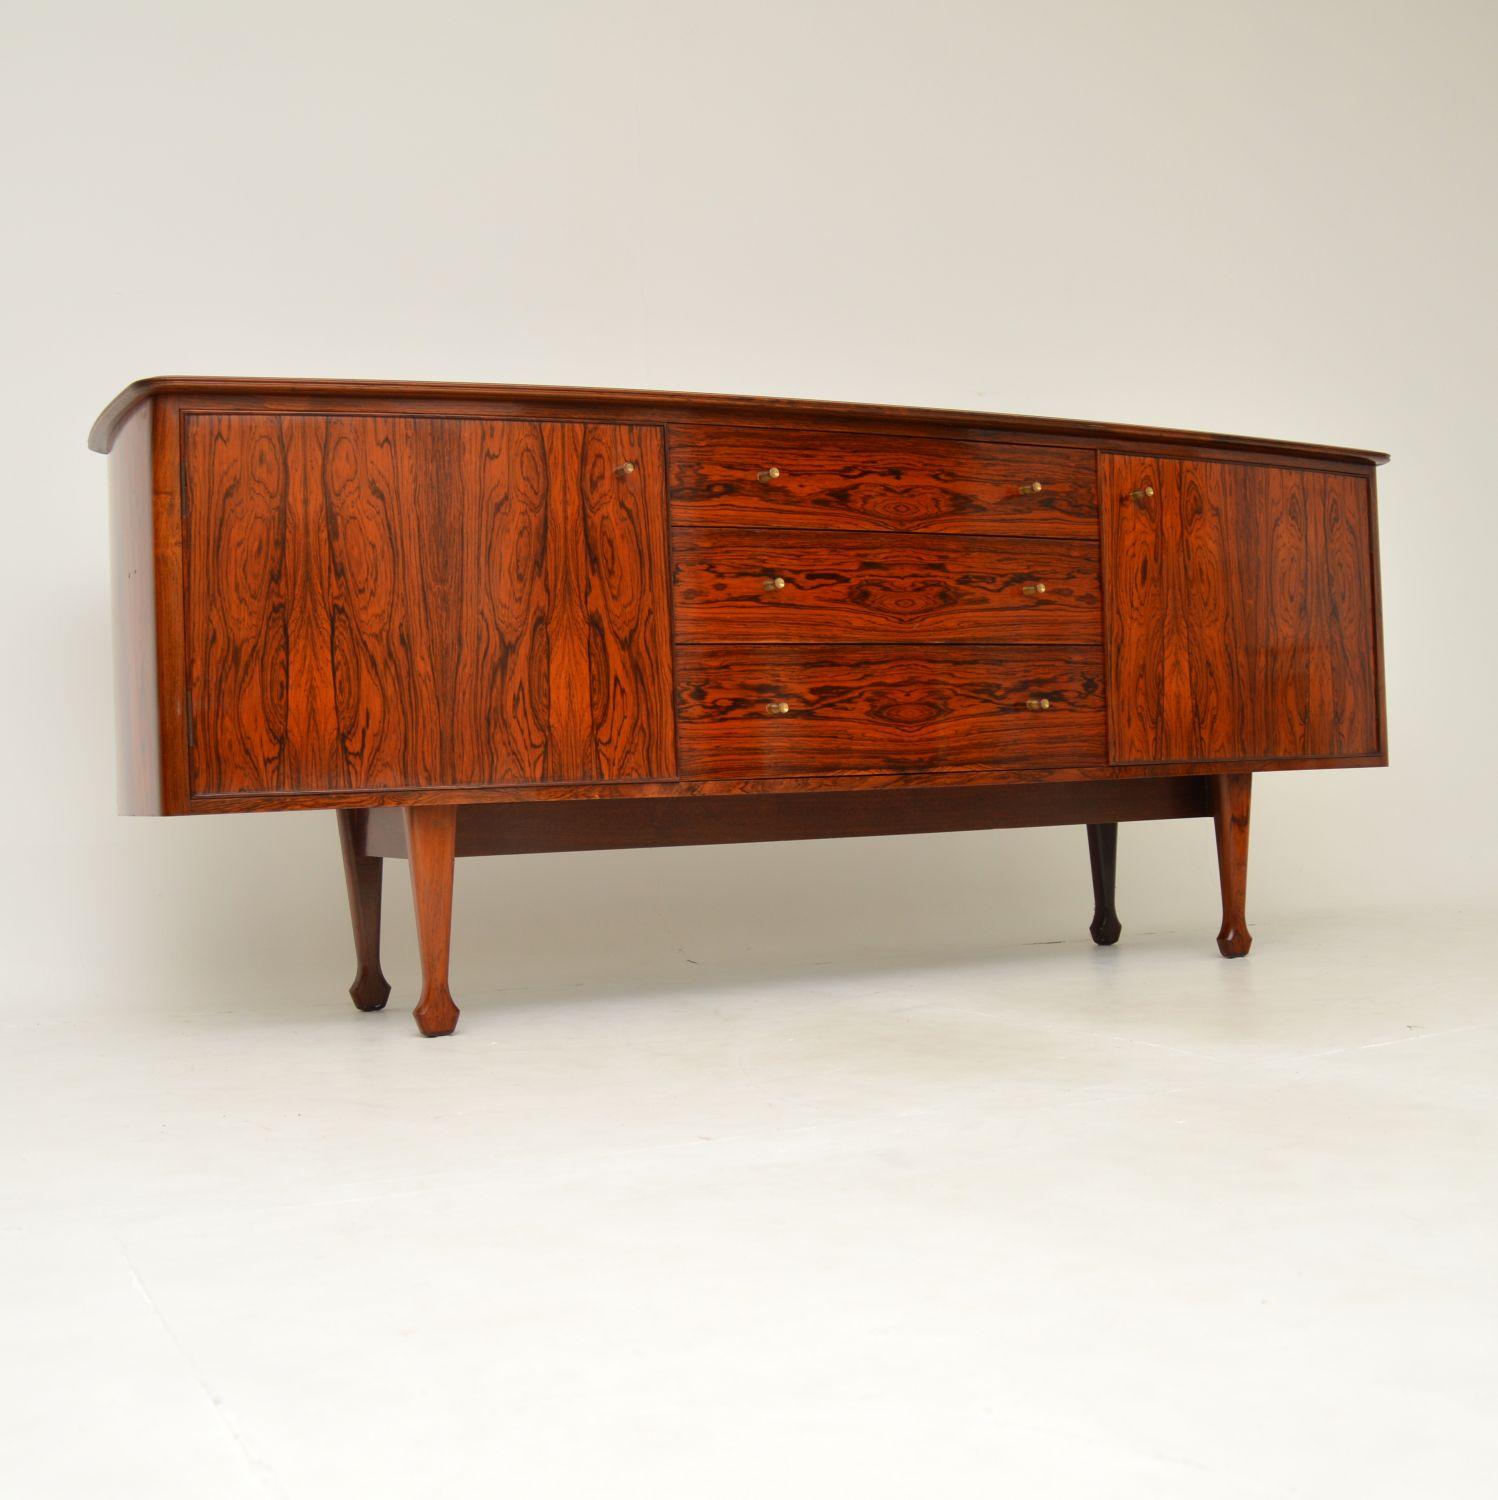 A stunning and very rare vintage sideboard. This was designed by Andrew Milne and was manufactured in England by Heal’s, it dates from the early 1950’s.

This is of superb quality, with gorgeous grain patterns throughout, even on the inside. The